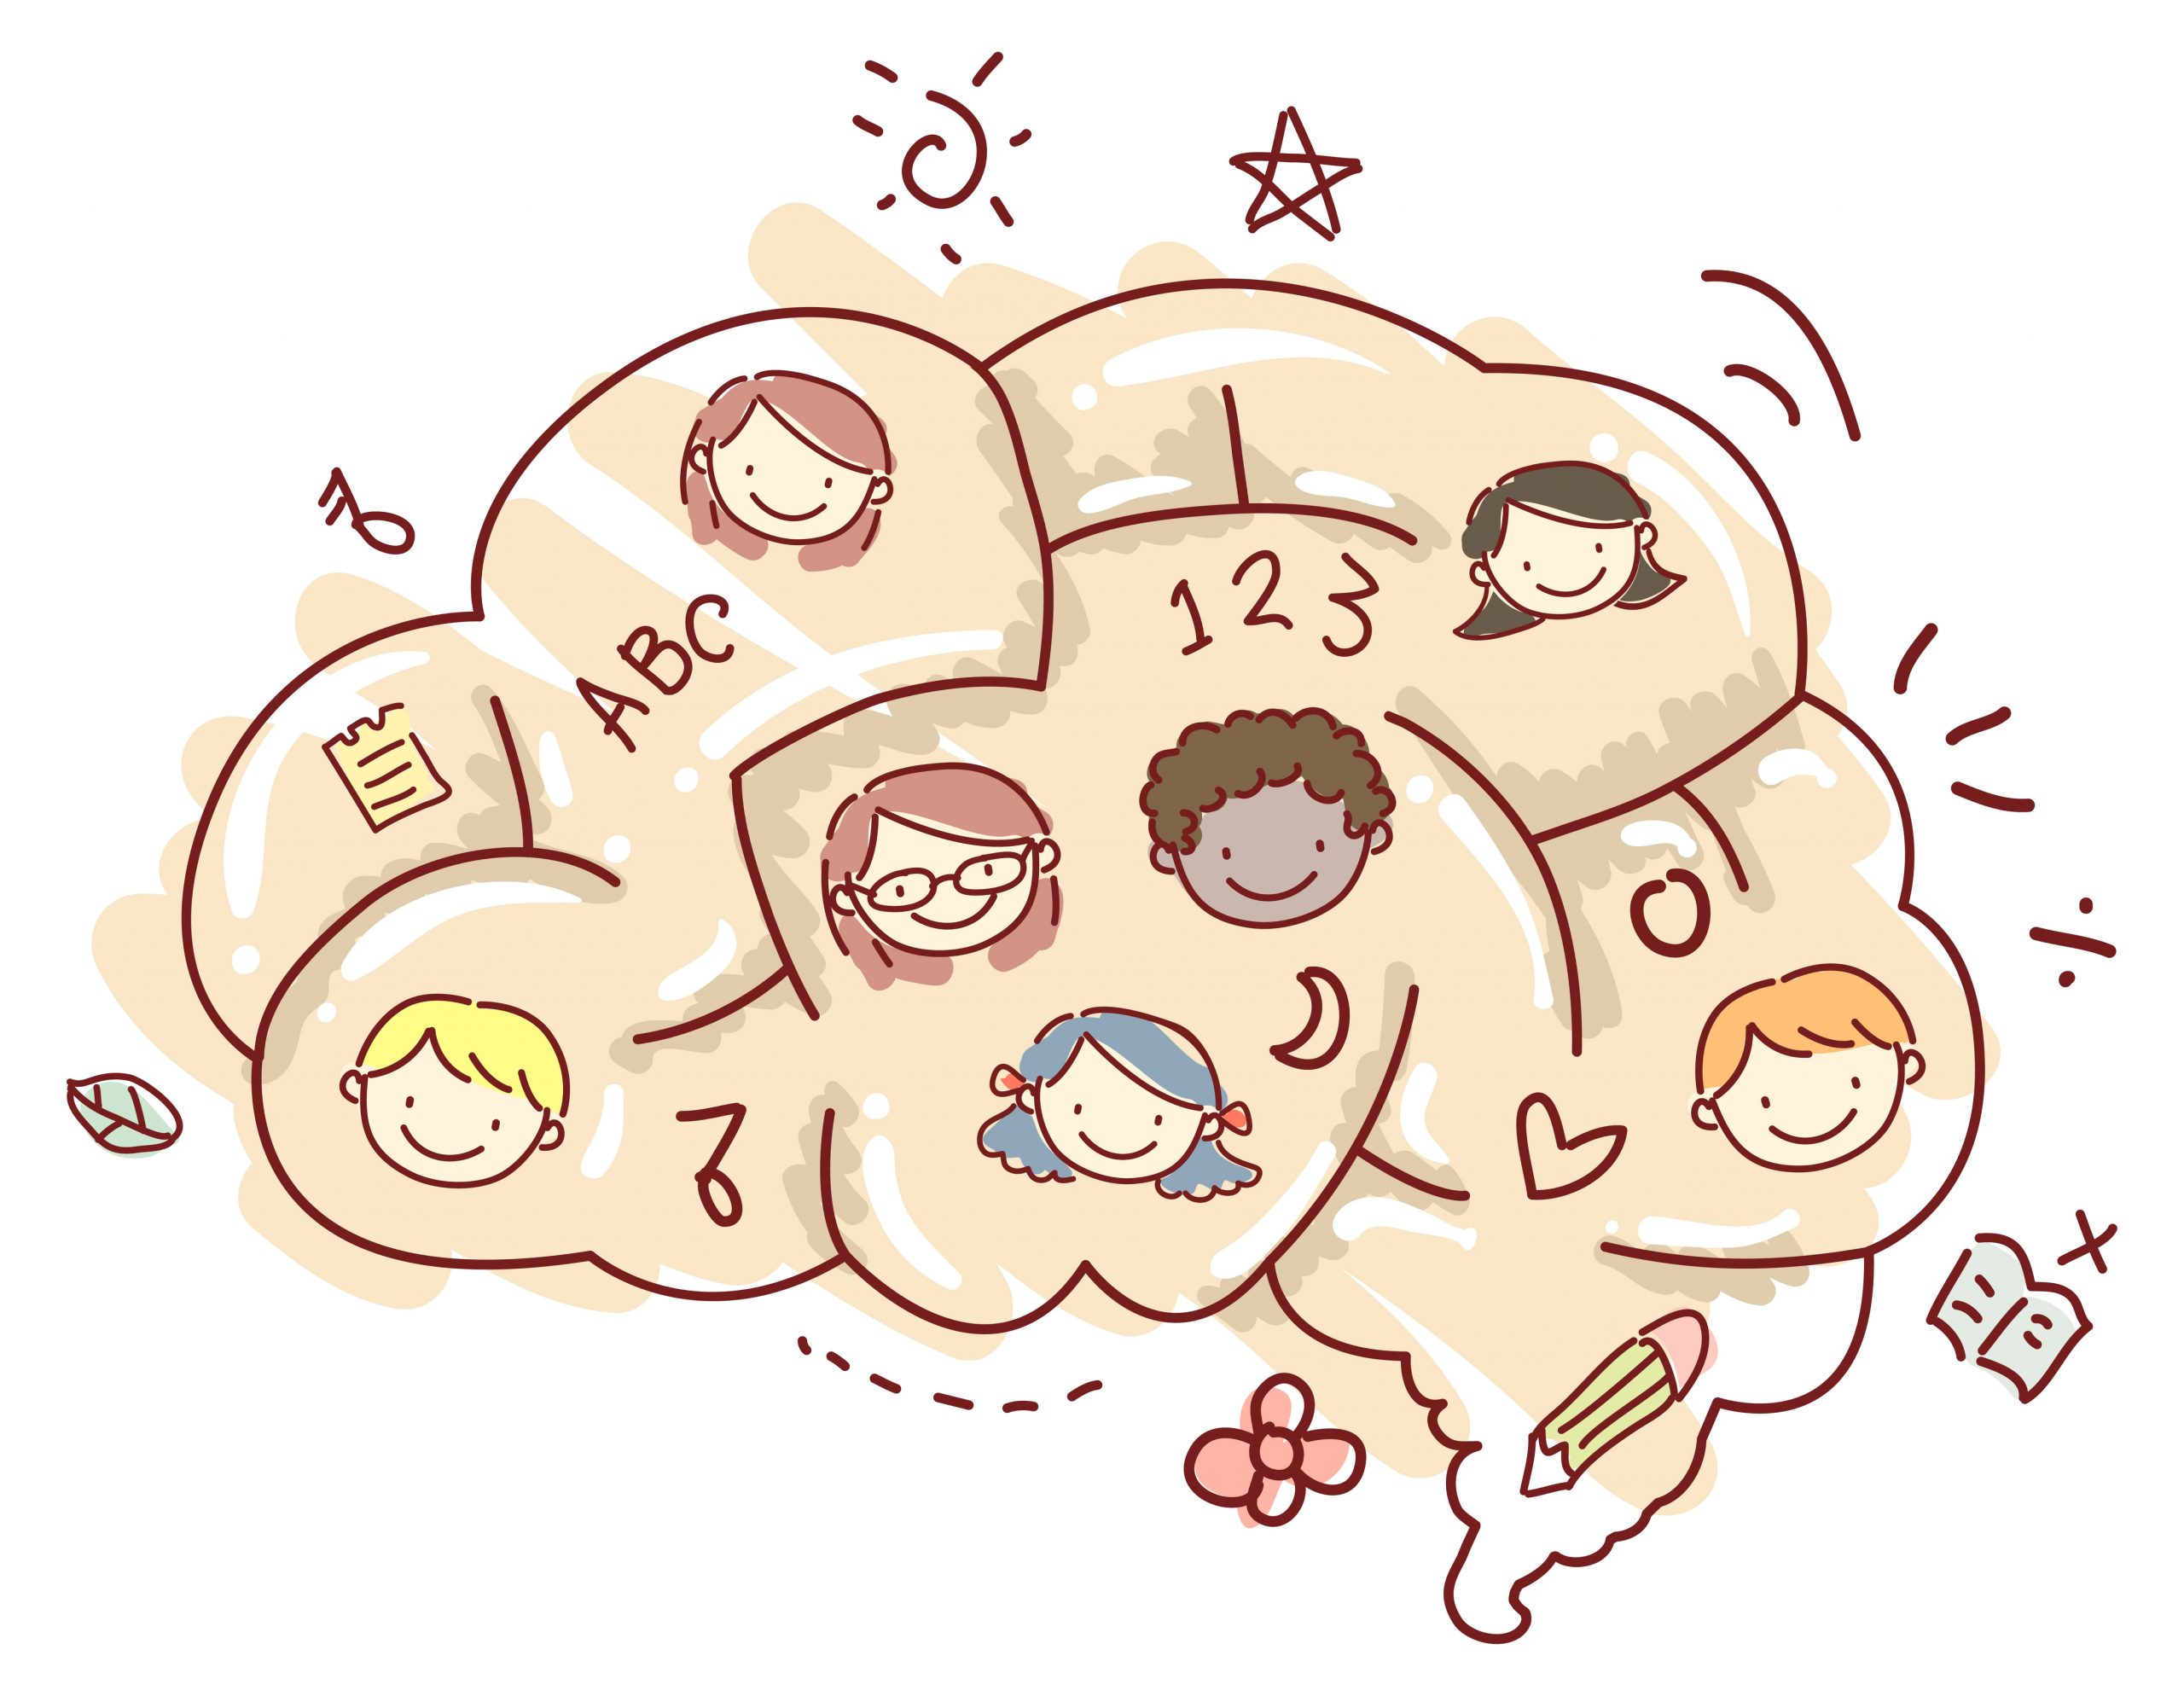 Illustration of a Brain Designed as a Maze with Kids Faces and Other Education Doodles